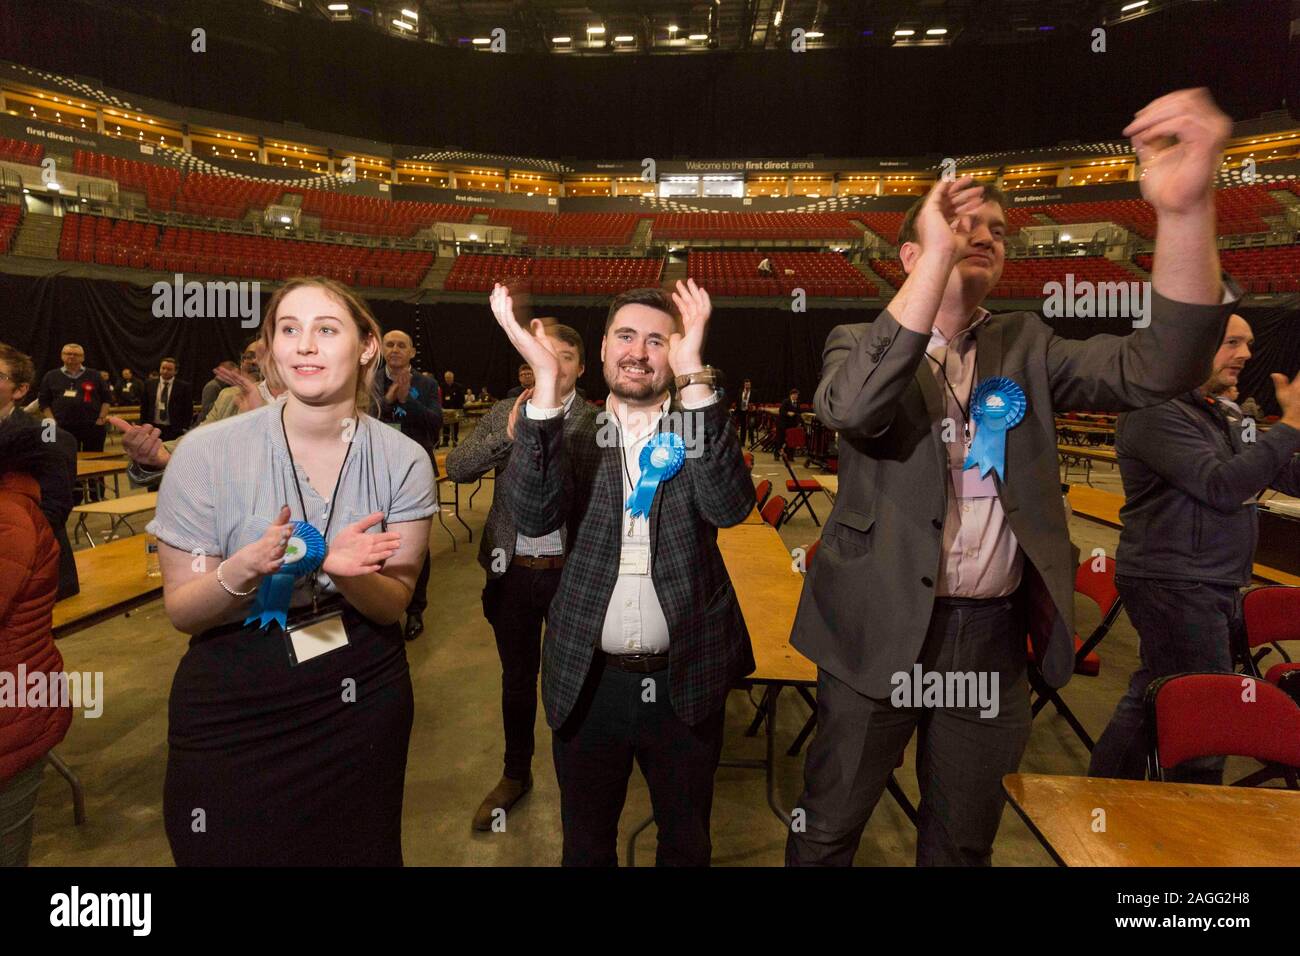 Picture by Chris Bull   13/12/19 General Election 2019 count and results at Leeds Arena. Conservative supporters.   www.chrisbullphotographer.com Stock Photo